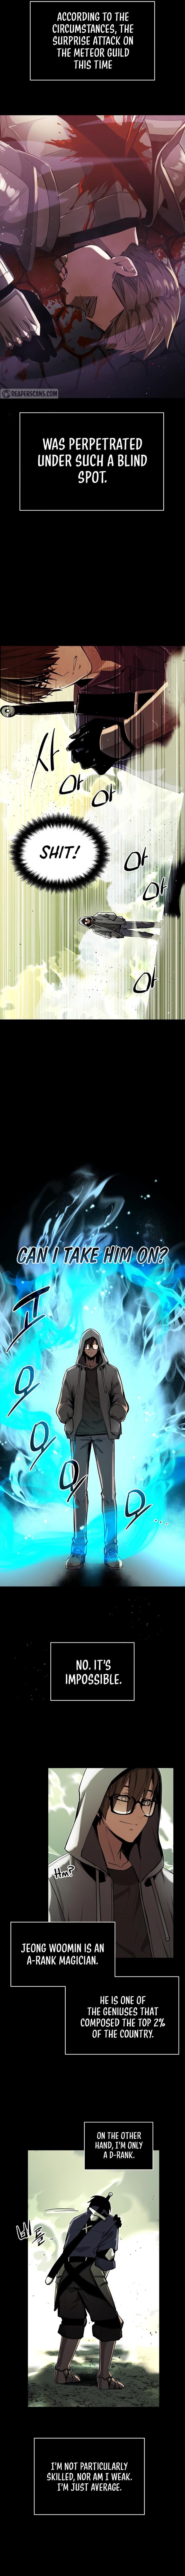 i-obtained-a-mythic-item-chap-3-3